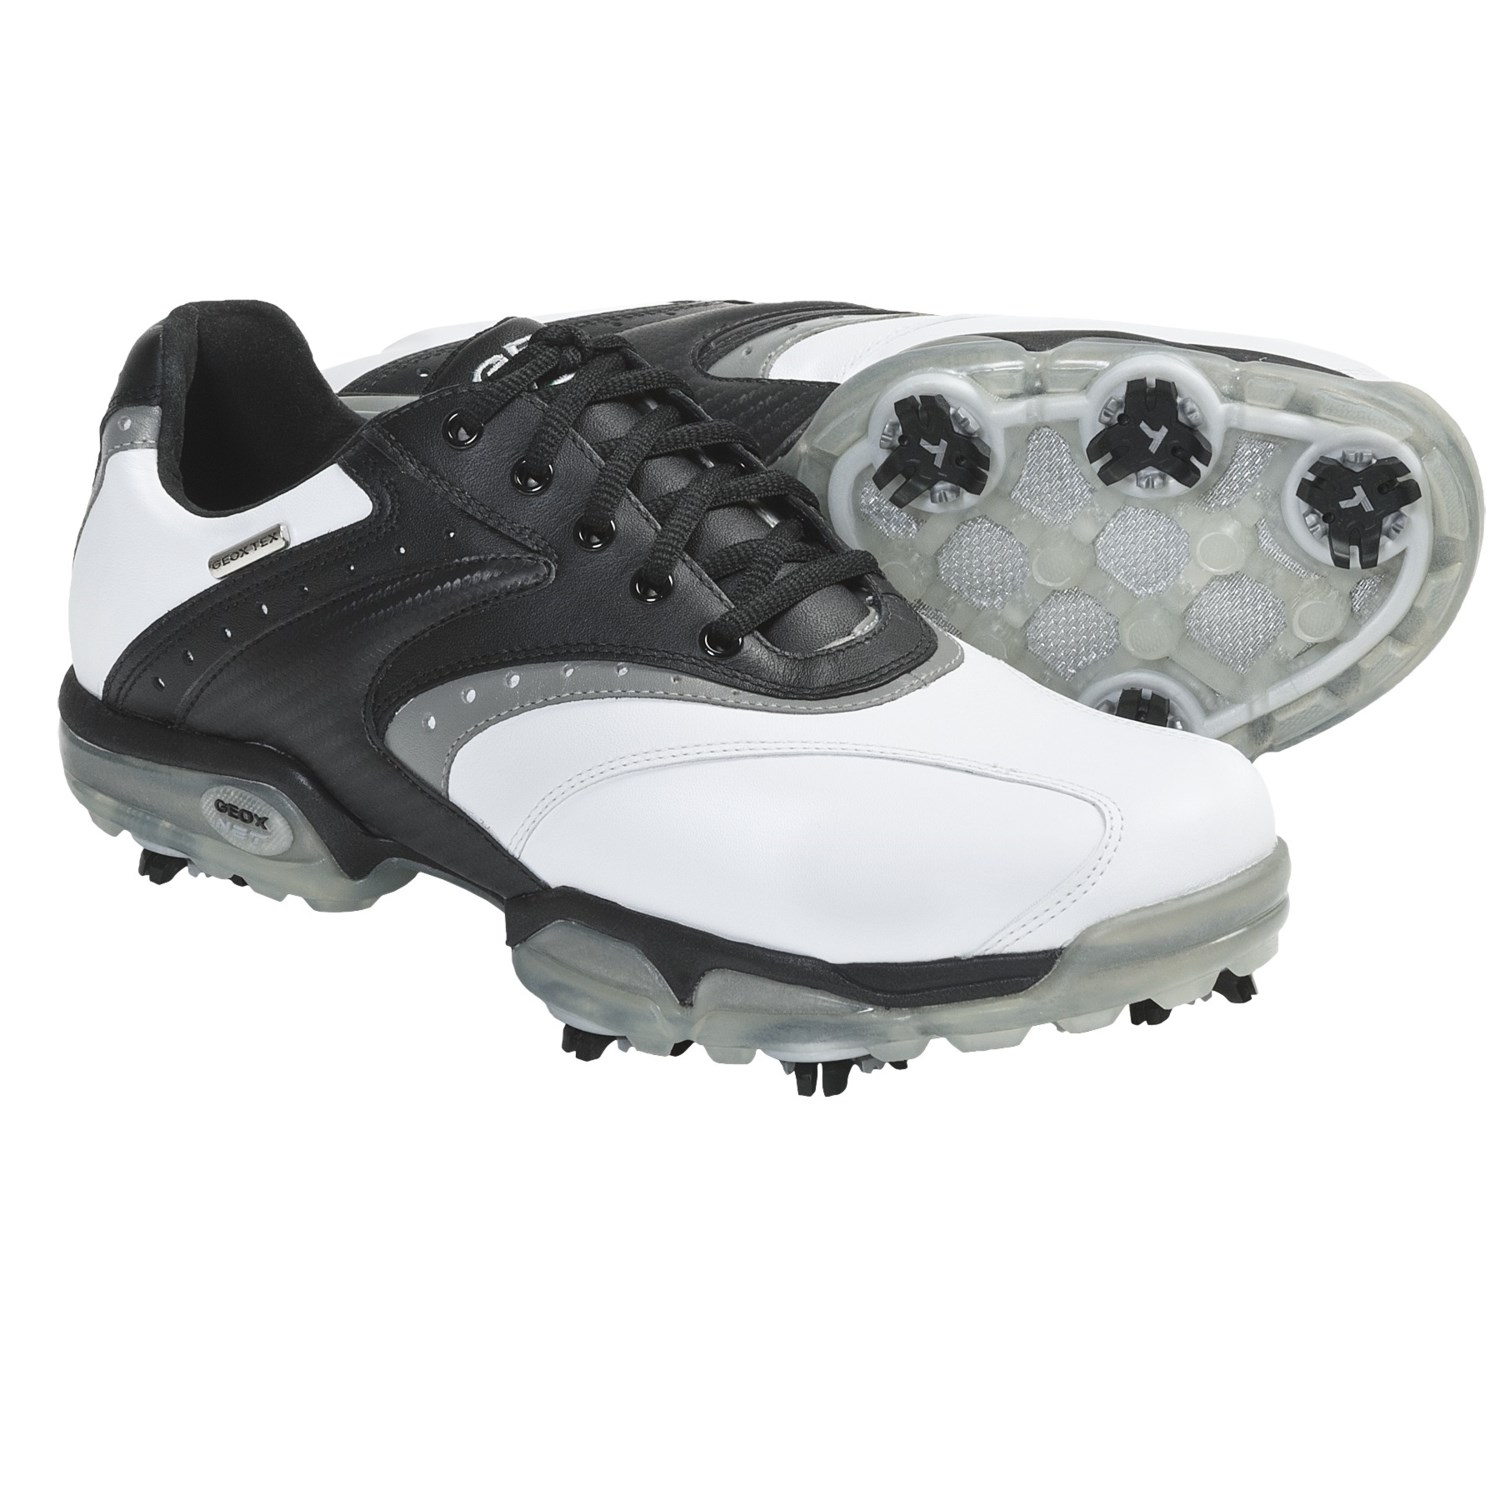 Geox Protech Saddle Golf Shoes (For Men) 5407G - Save 51%